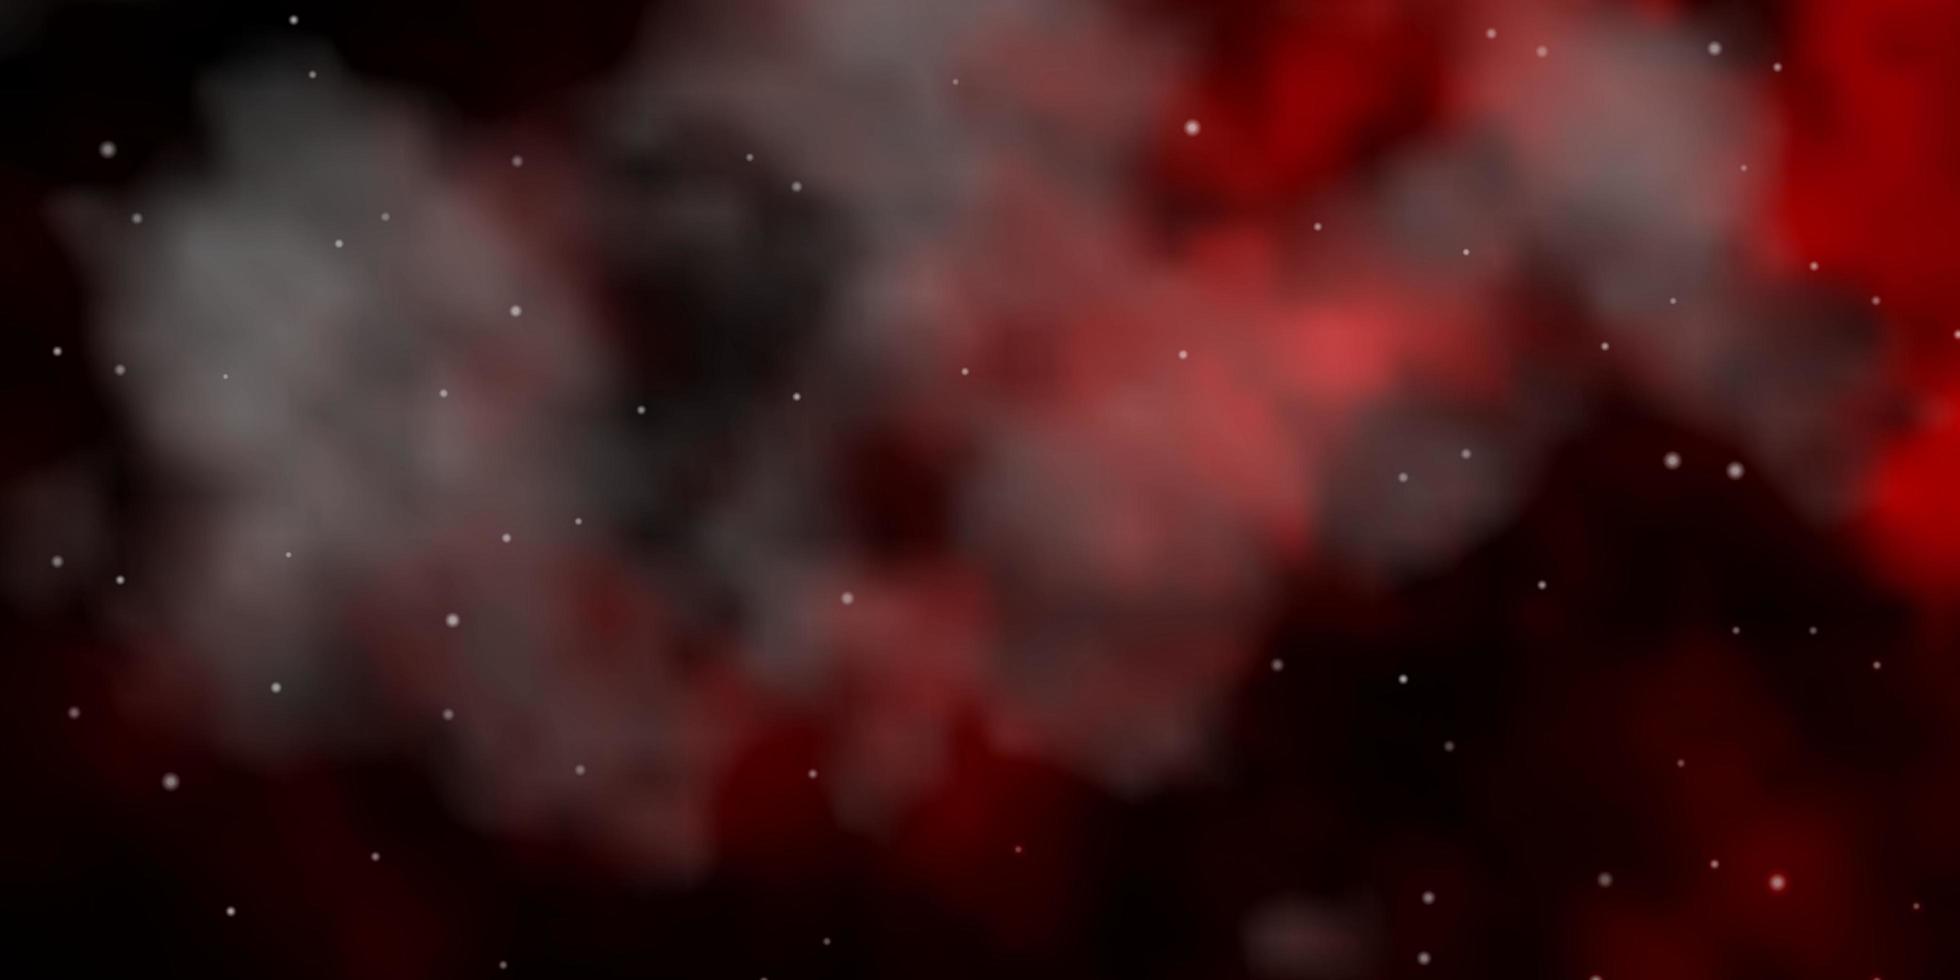 Dark Red vector background with colorful stars